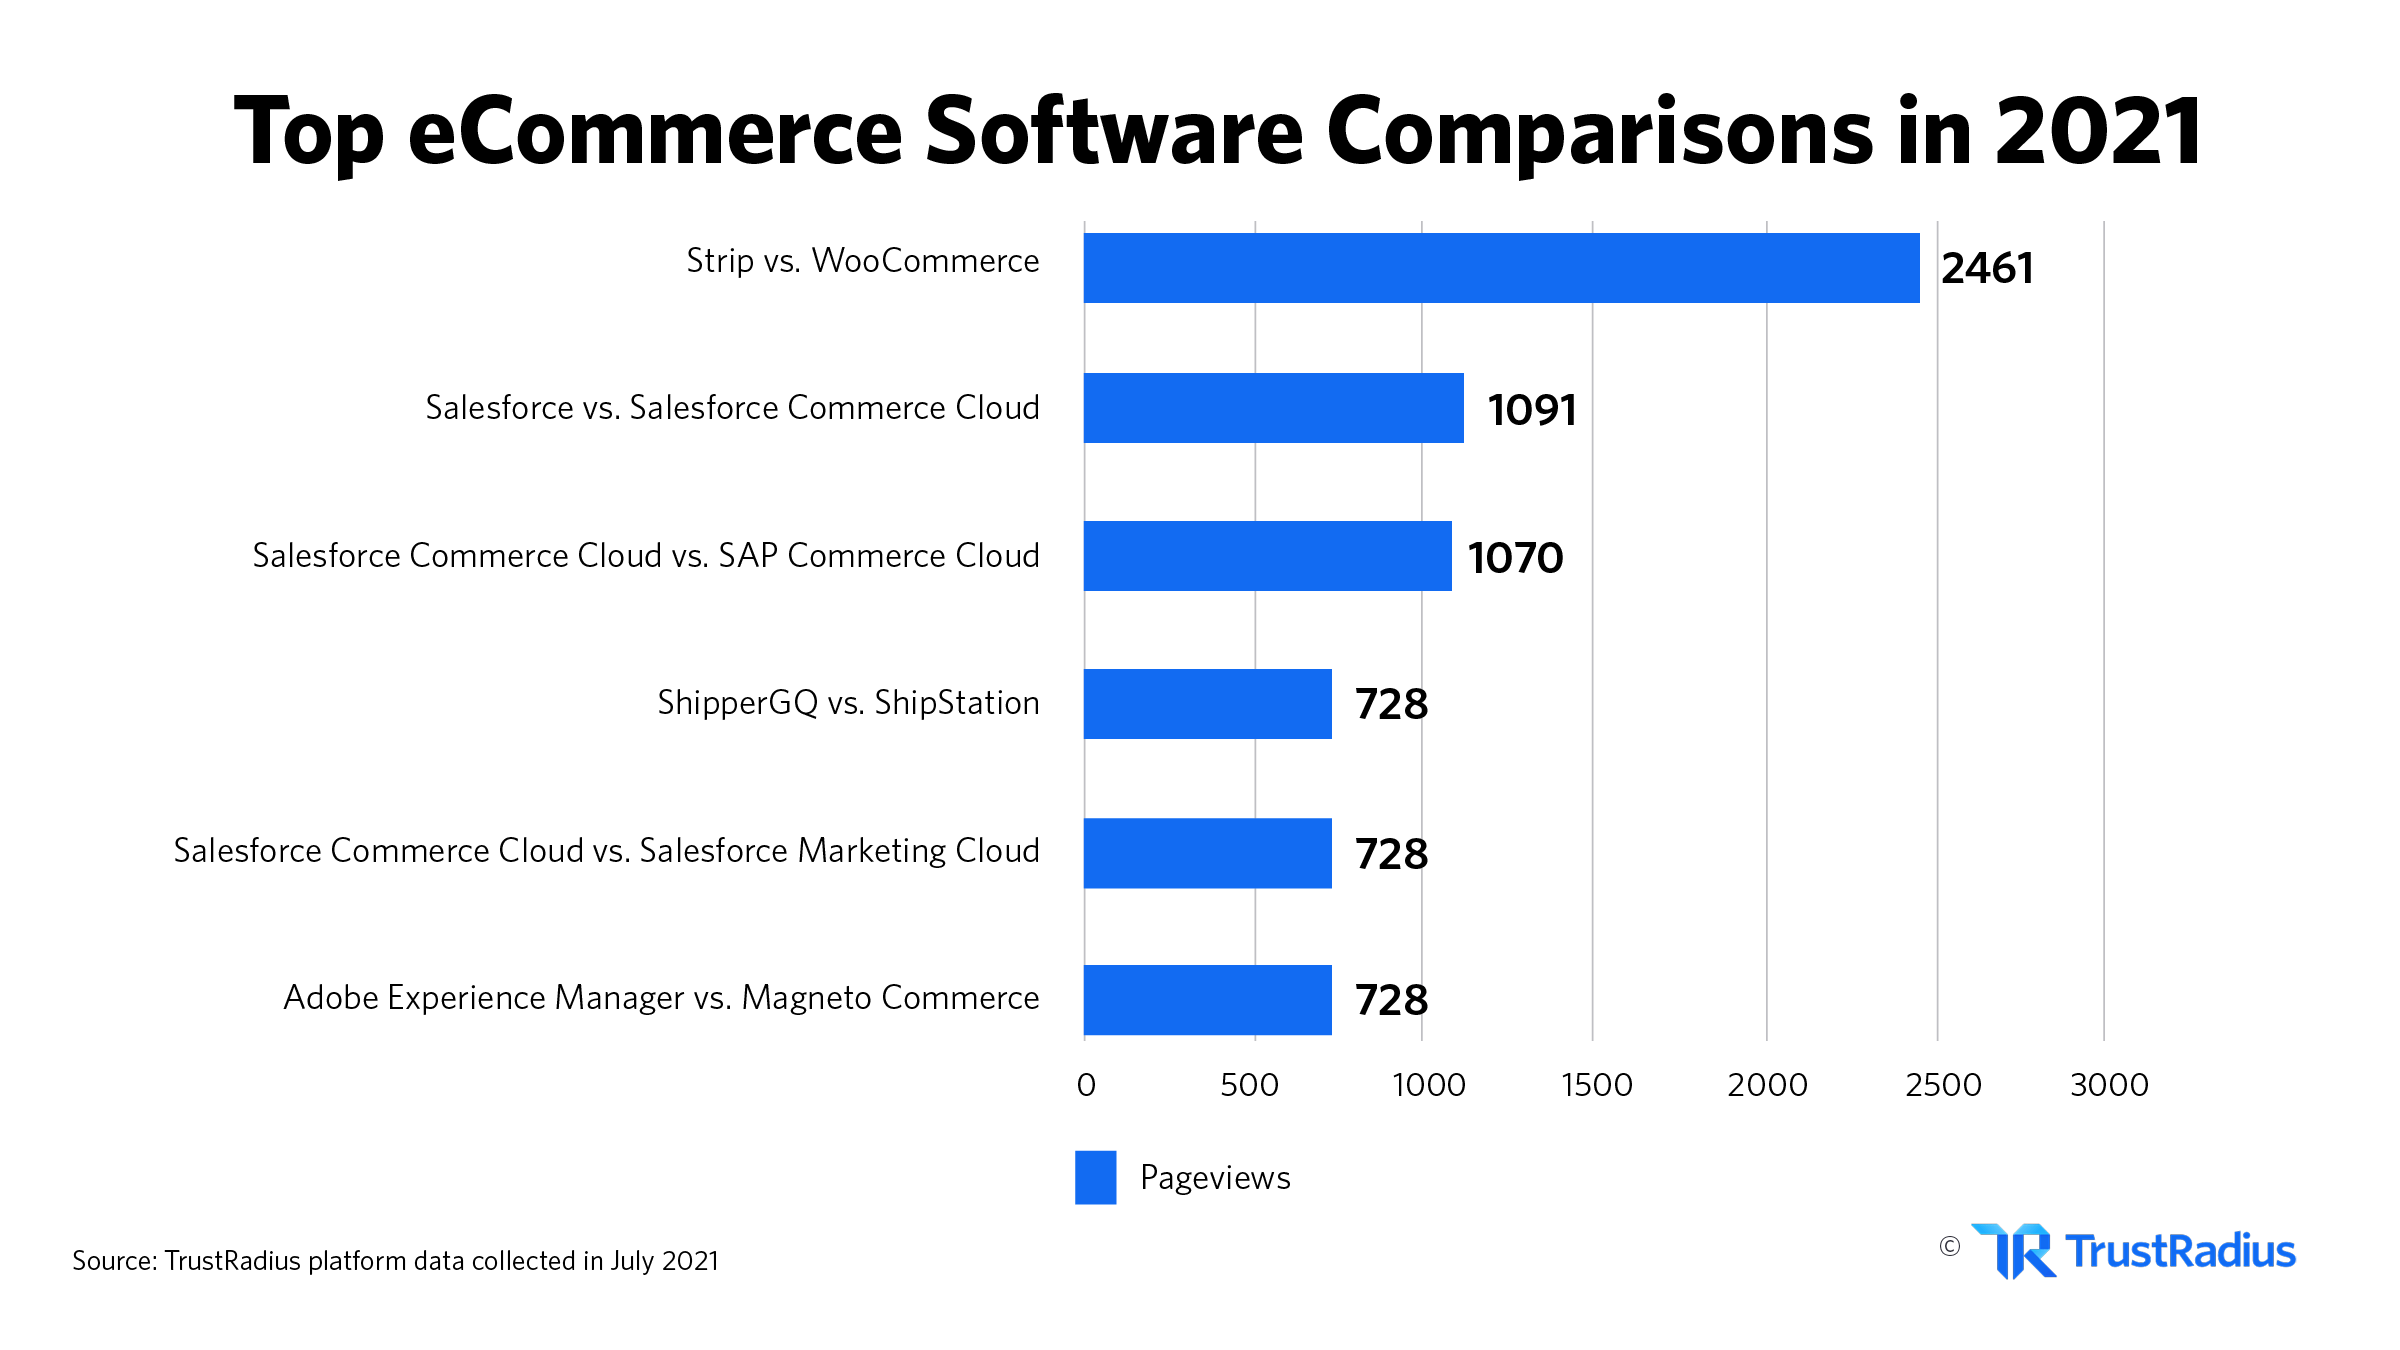 Top ecommerce comparisons in 2021